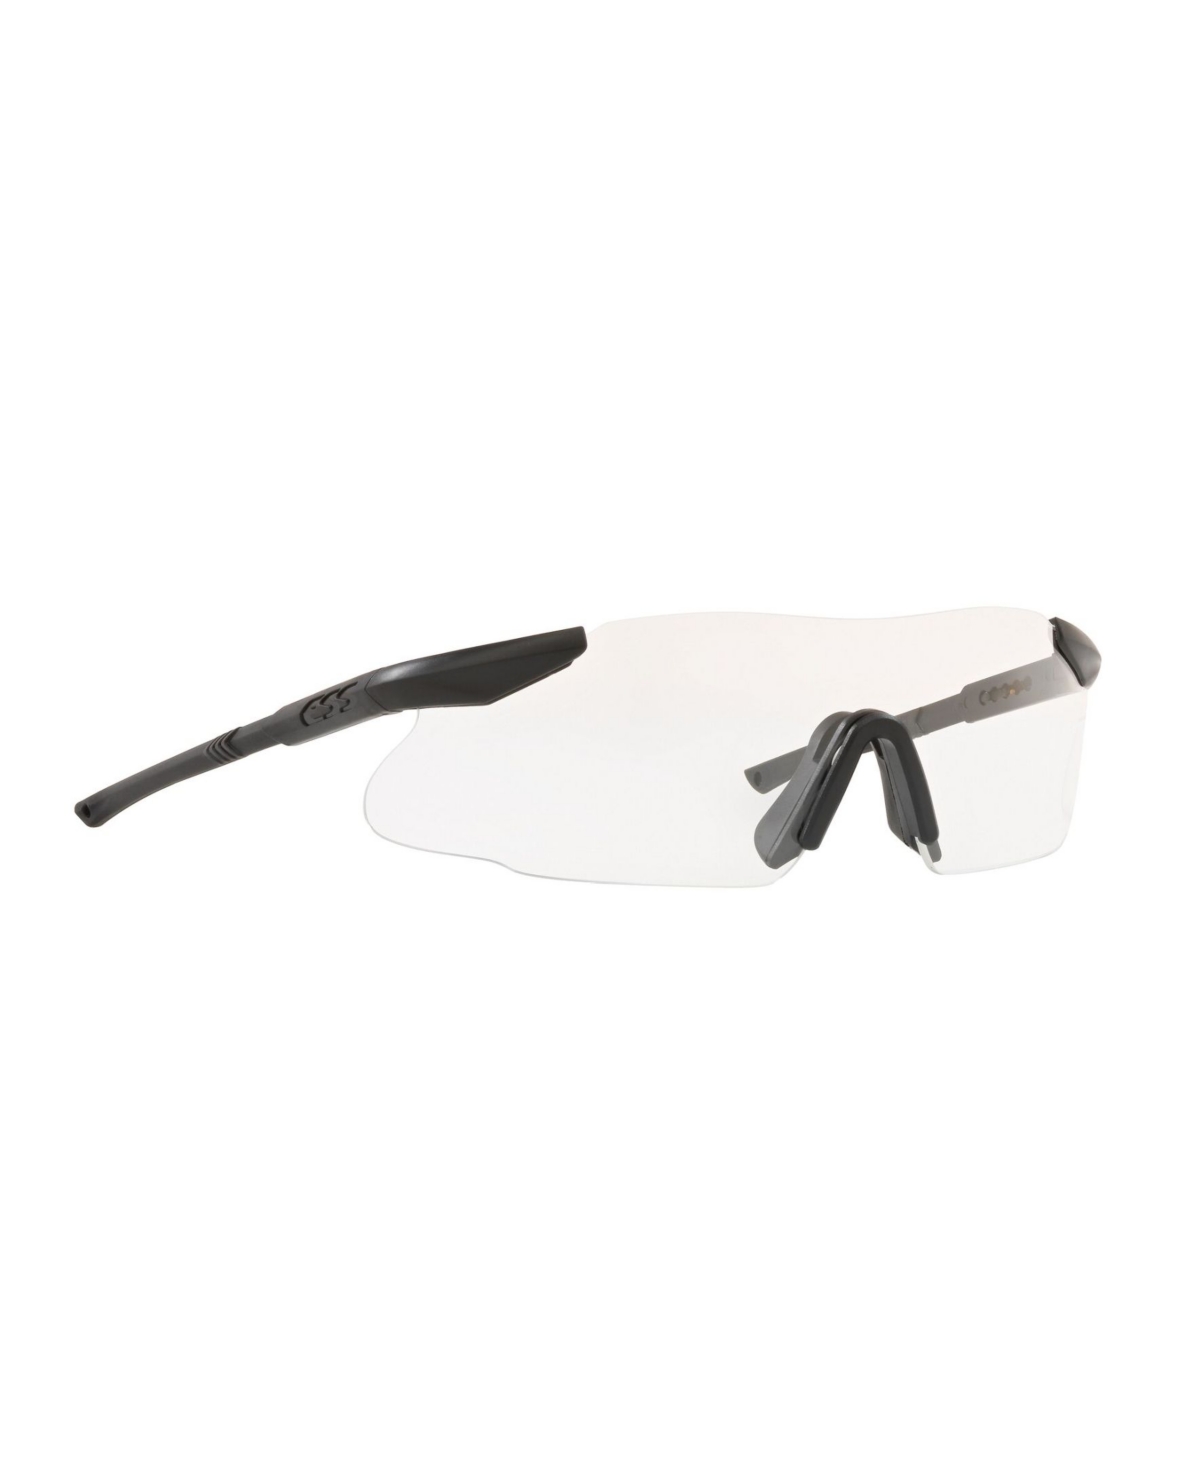 Ppe Safety Glasses, Ess Ice Ll Ppe - Black